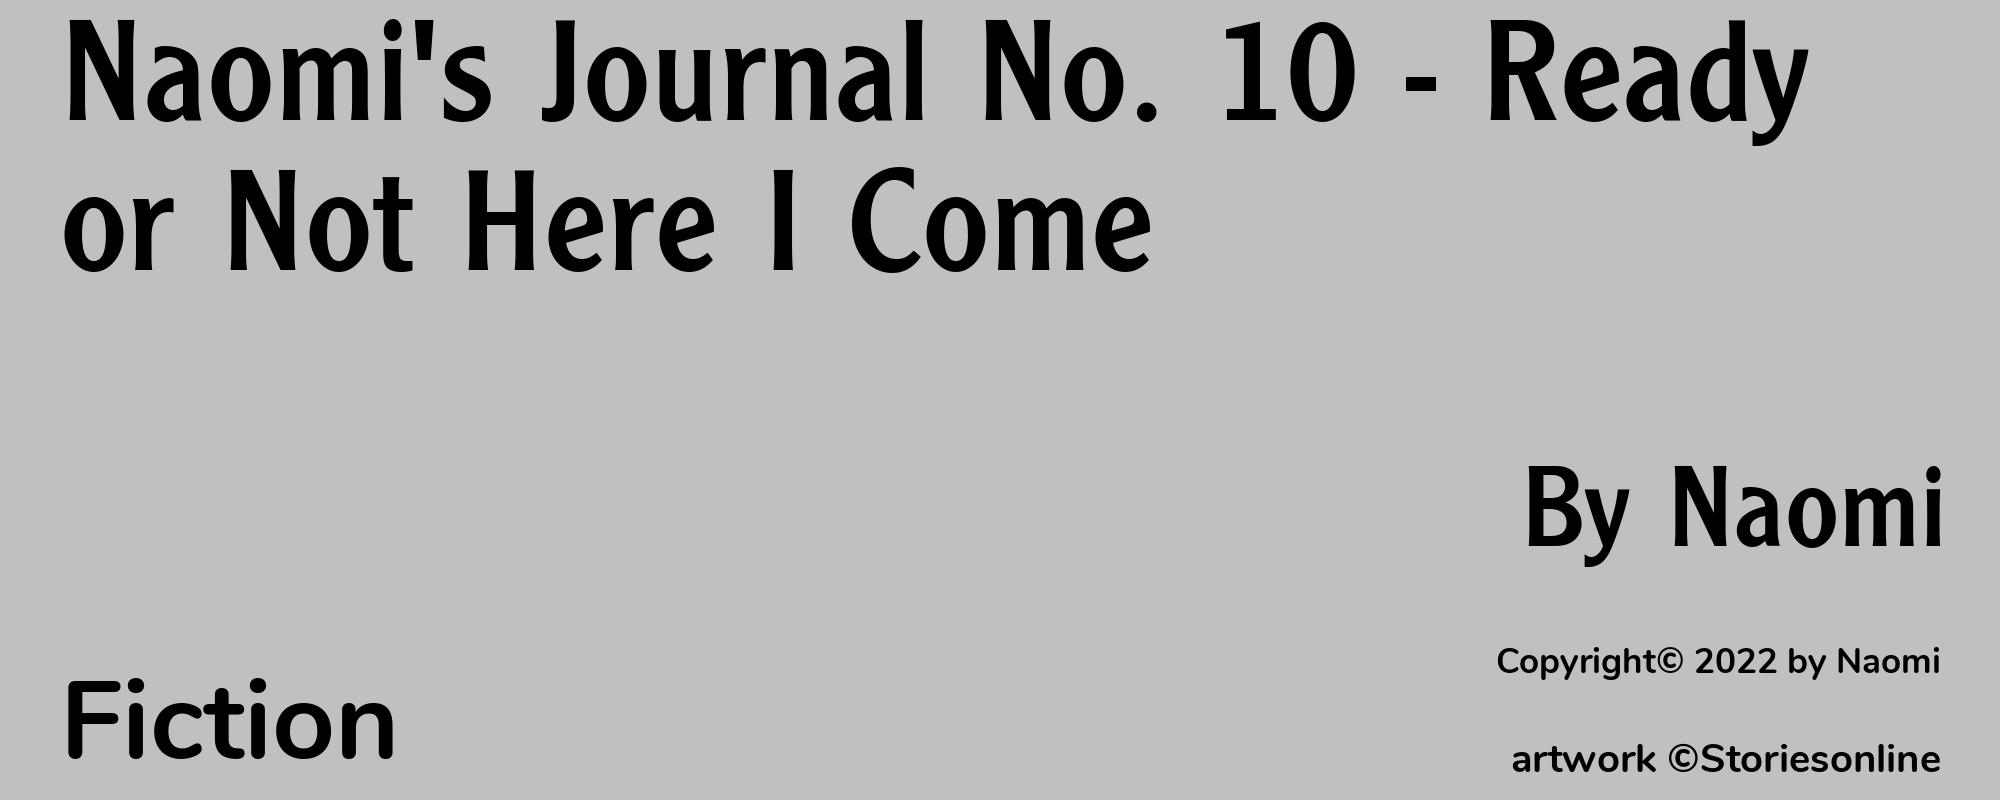 Naomi's Journal No. 10 - Ready or Not Here I Come - Cover